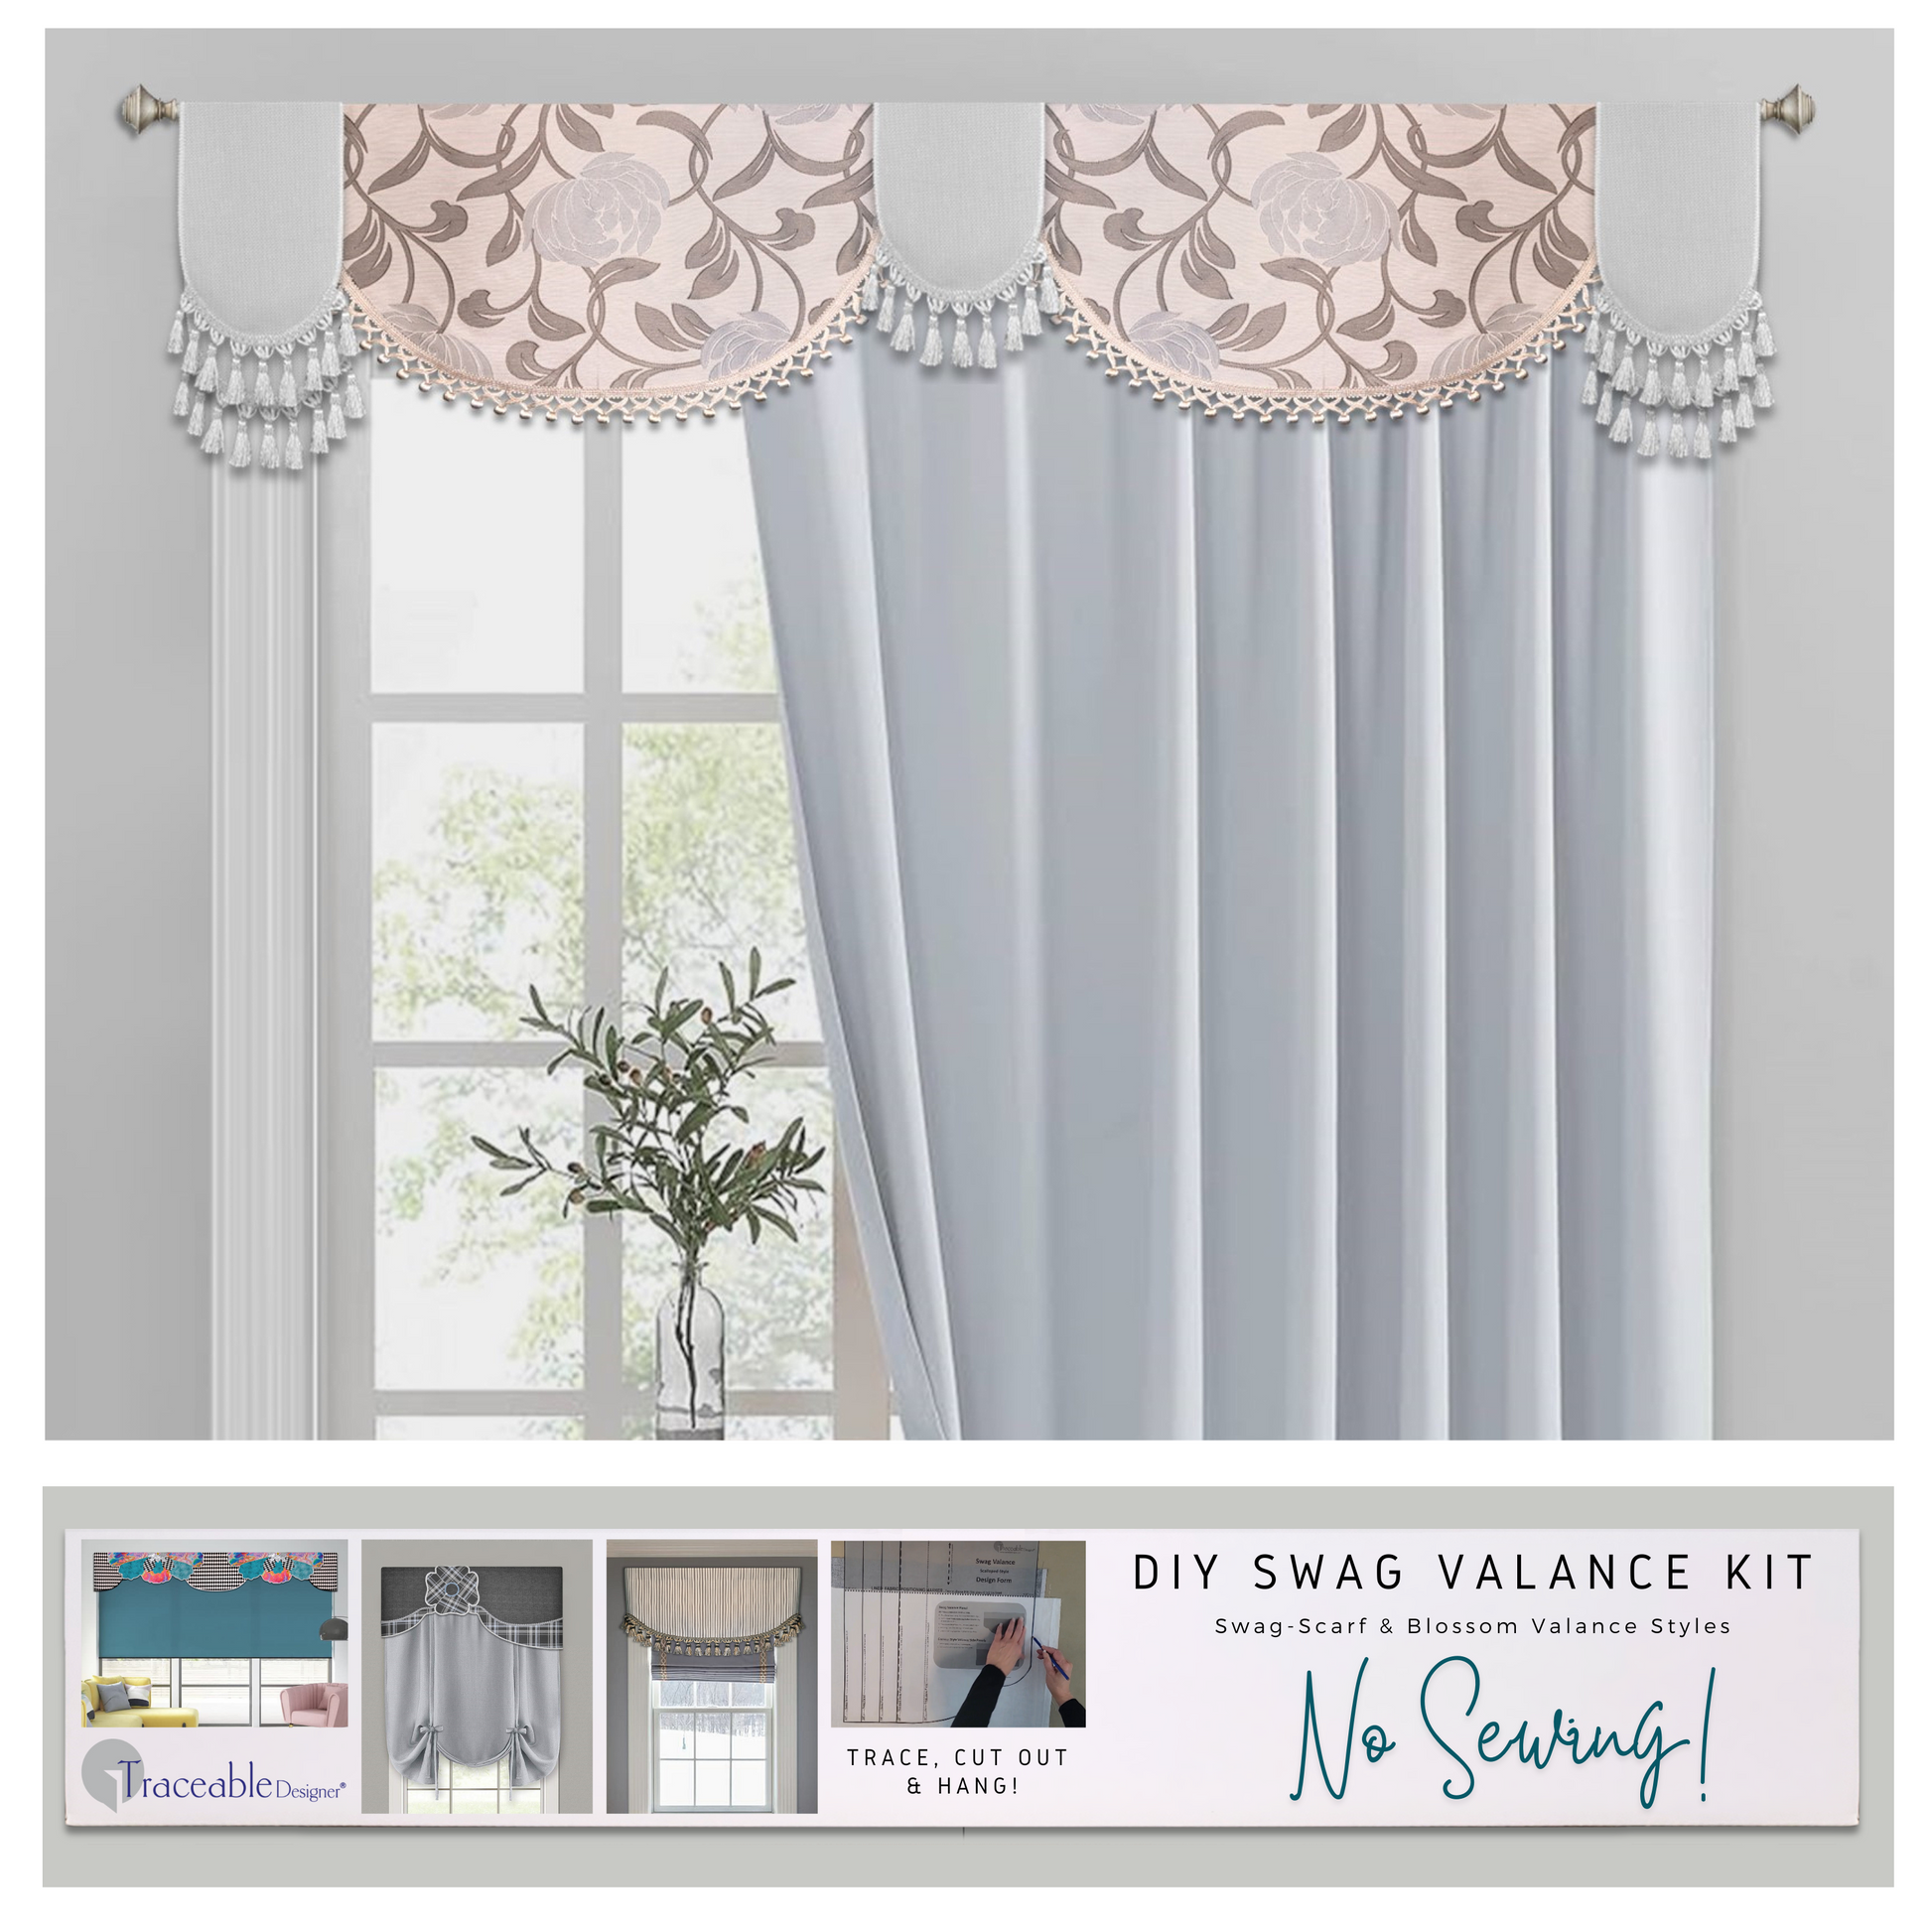 Traceable Designer no-sew swag, scarf & blossom valance kit includes tulip, primrose, wildflower & swag-scarf valance styles. No sewing or DIY experience needed!